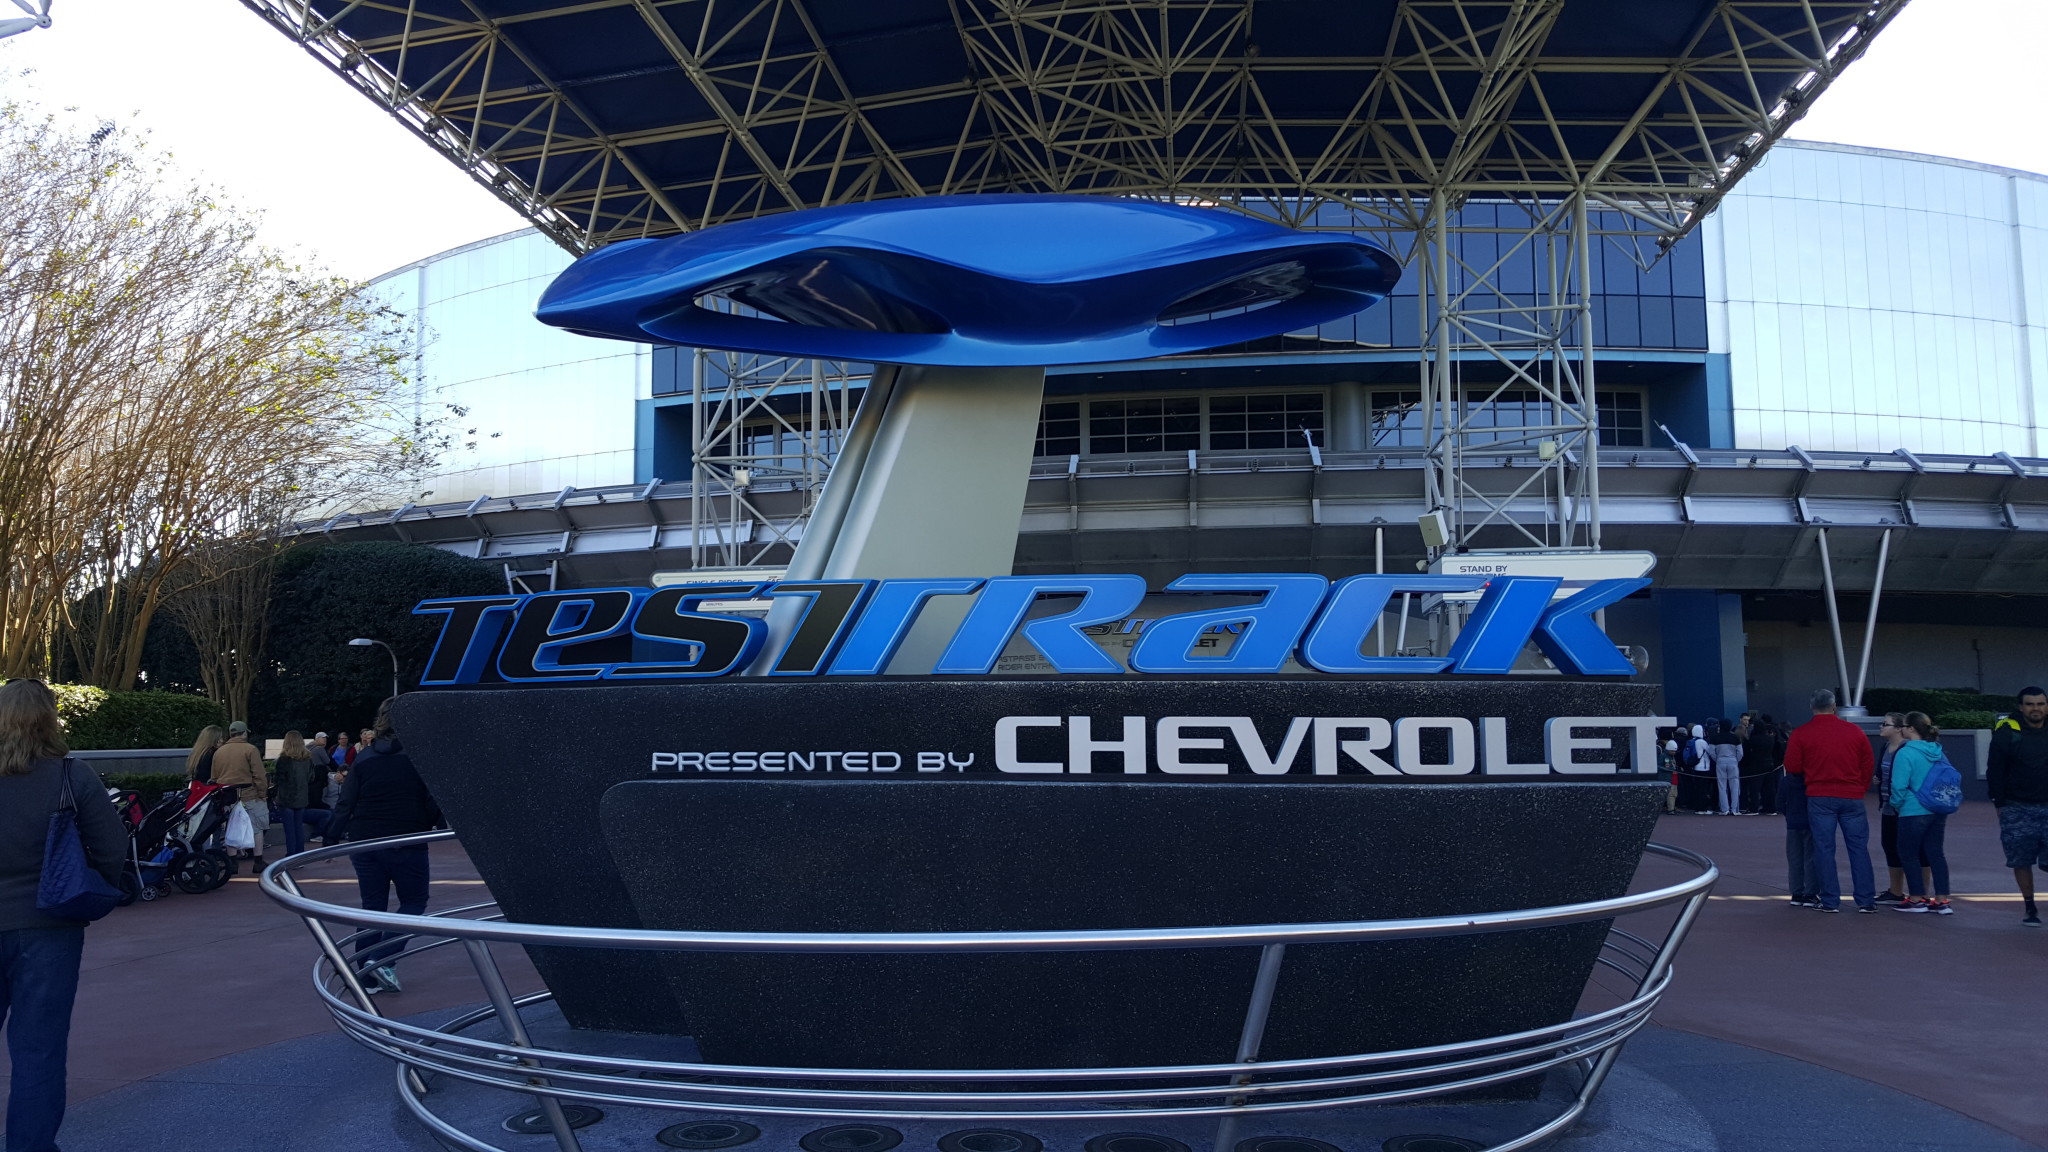 Weird things happen on Epcot’s Test Track!